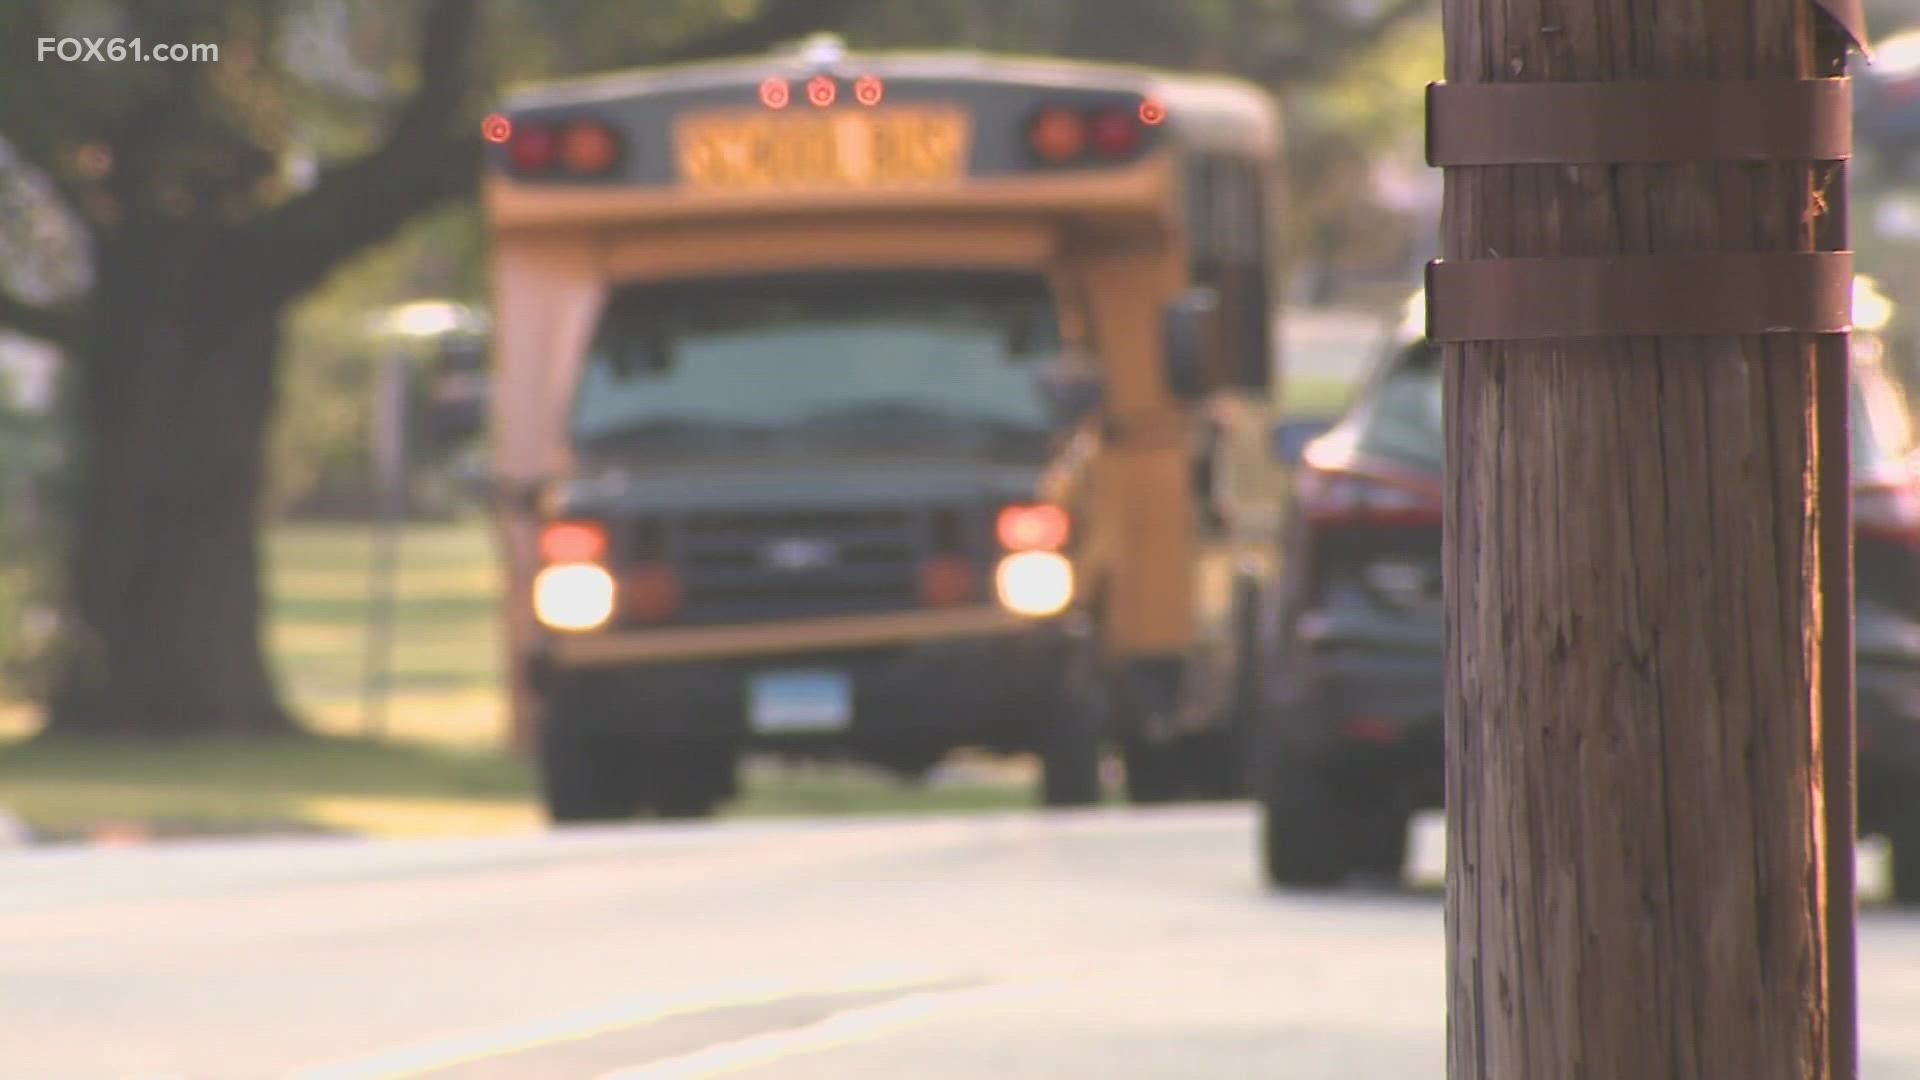 CEA said the lack of air conditioning is a problem in many of the state's schools.